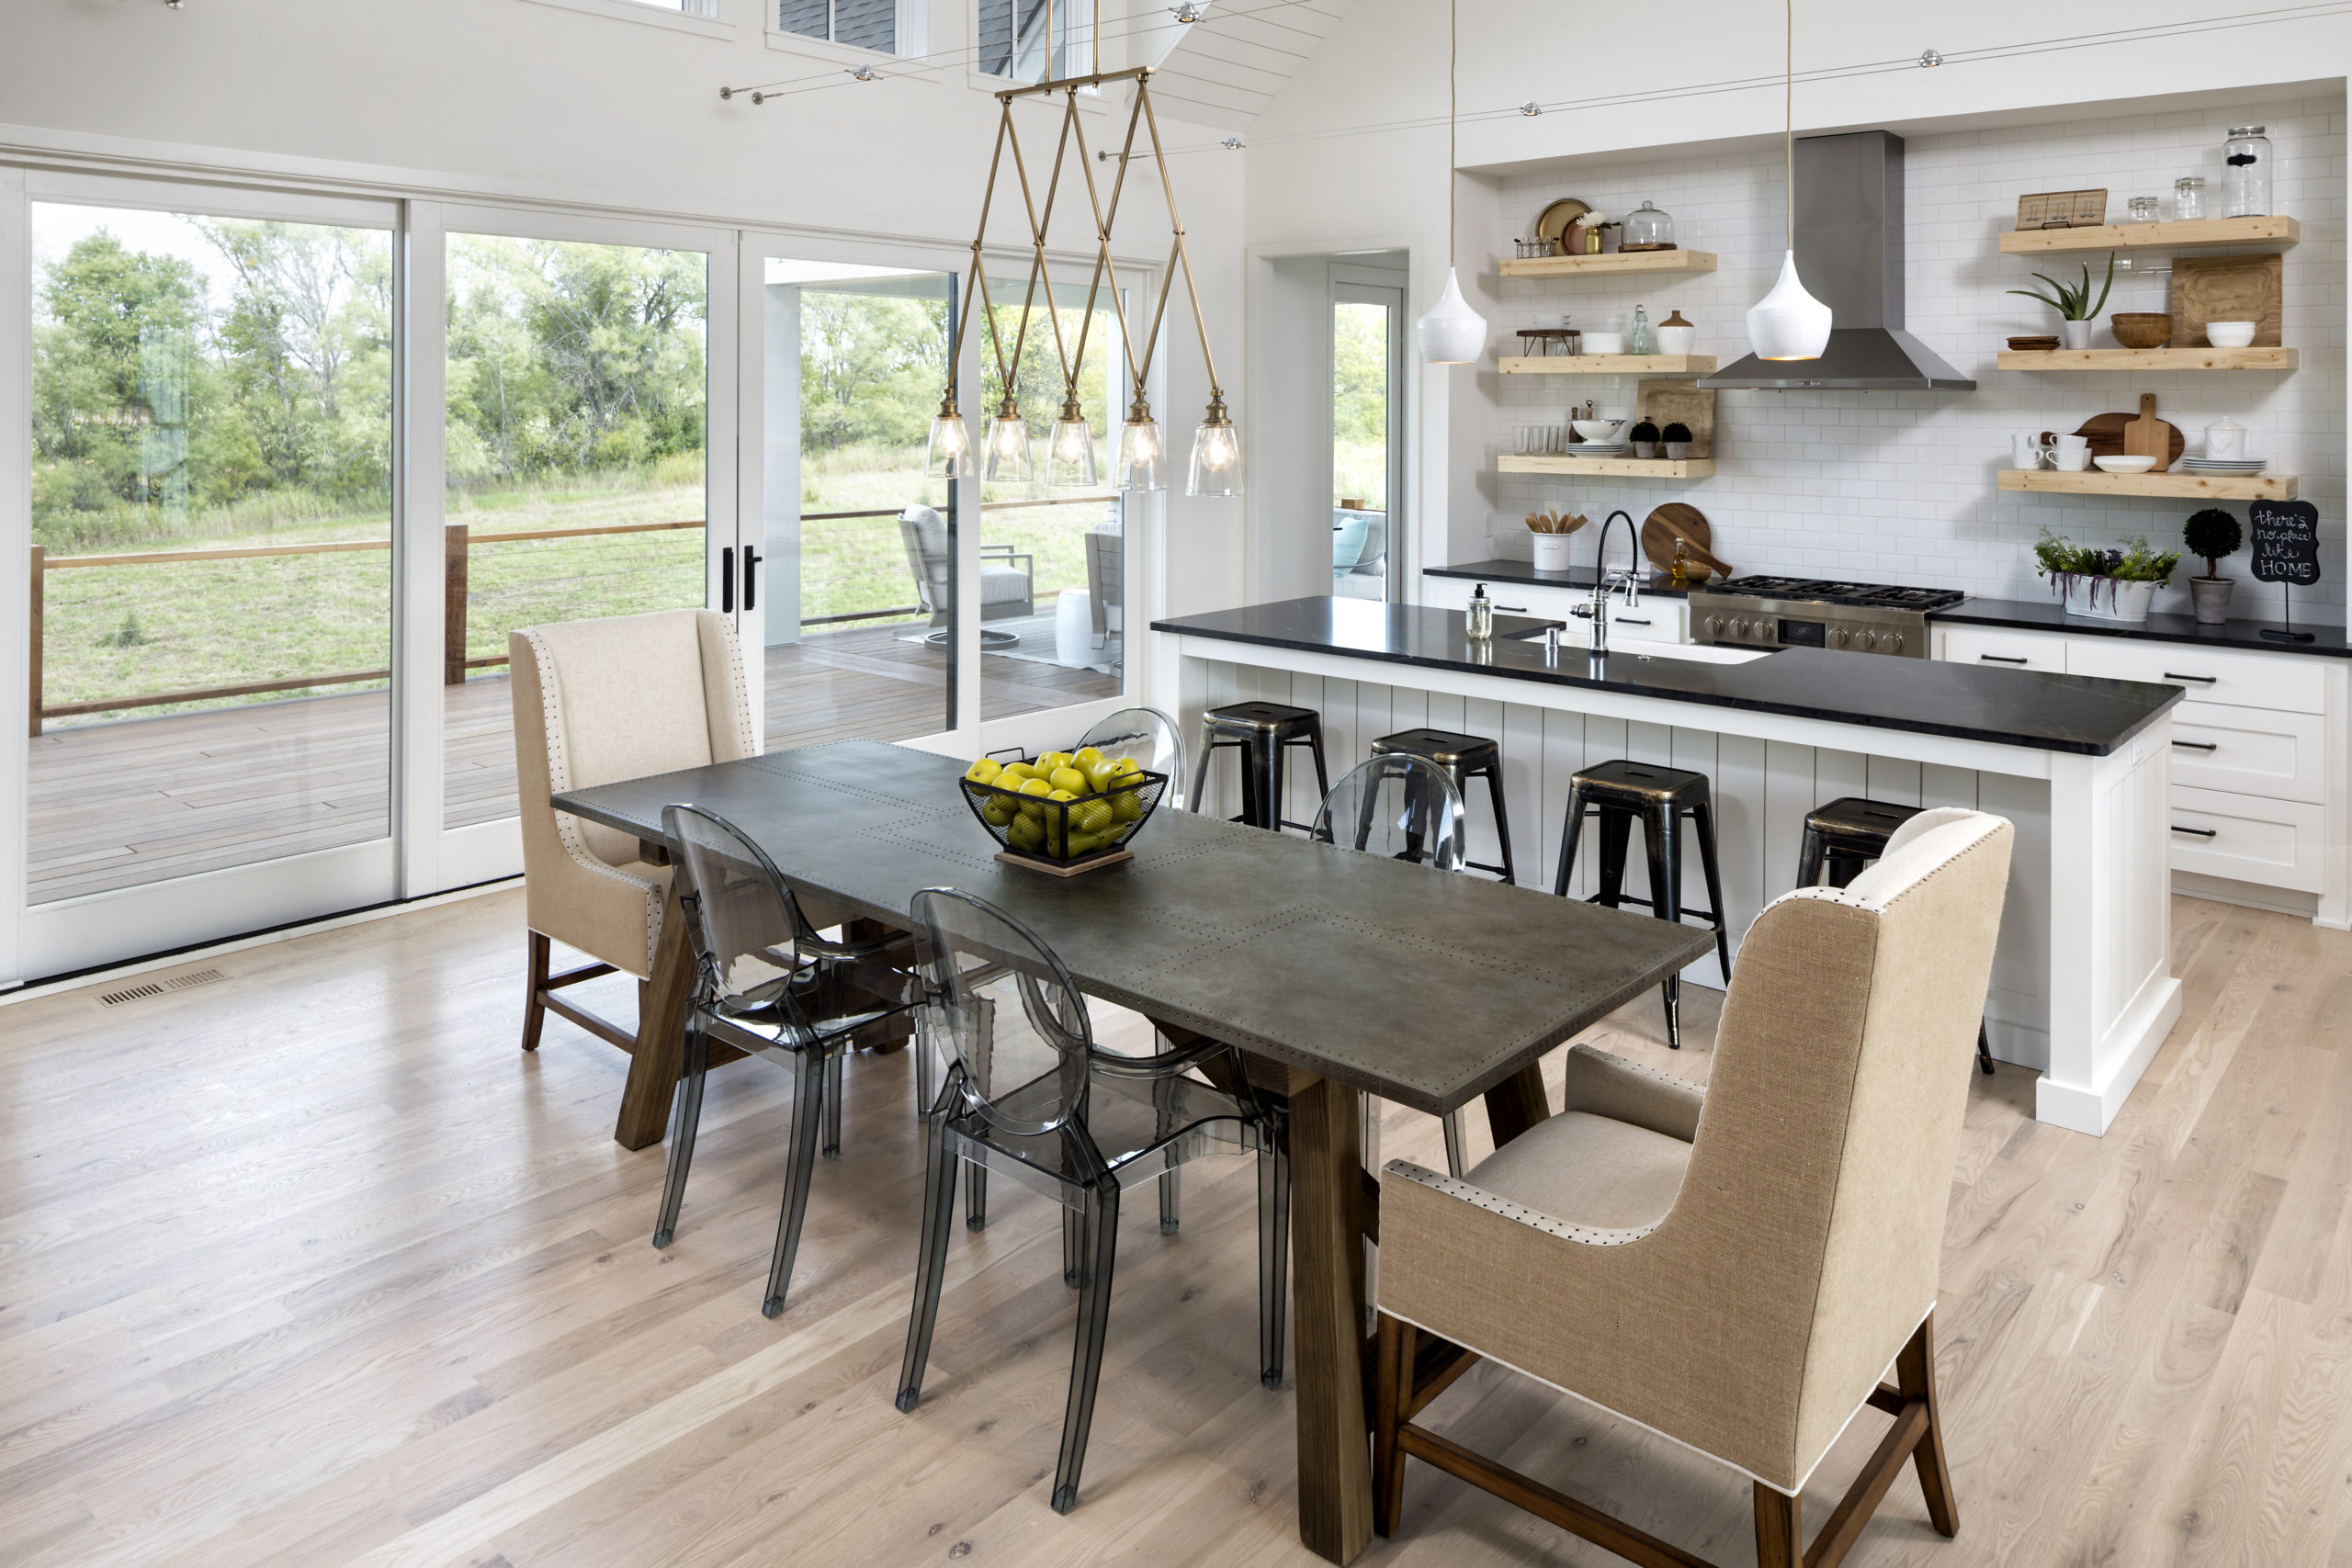 A kitchen with a dining table and chairs.